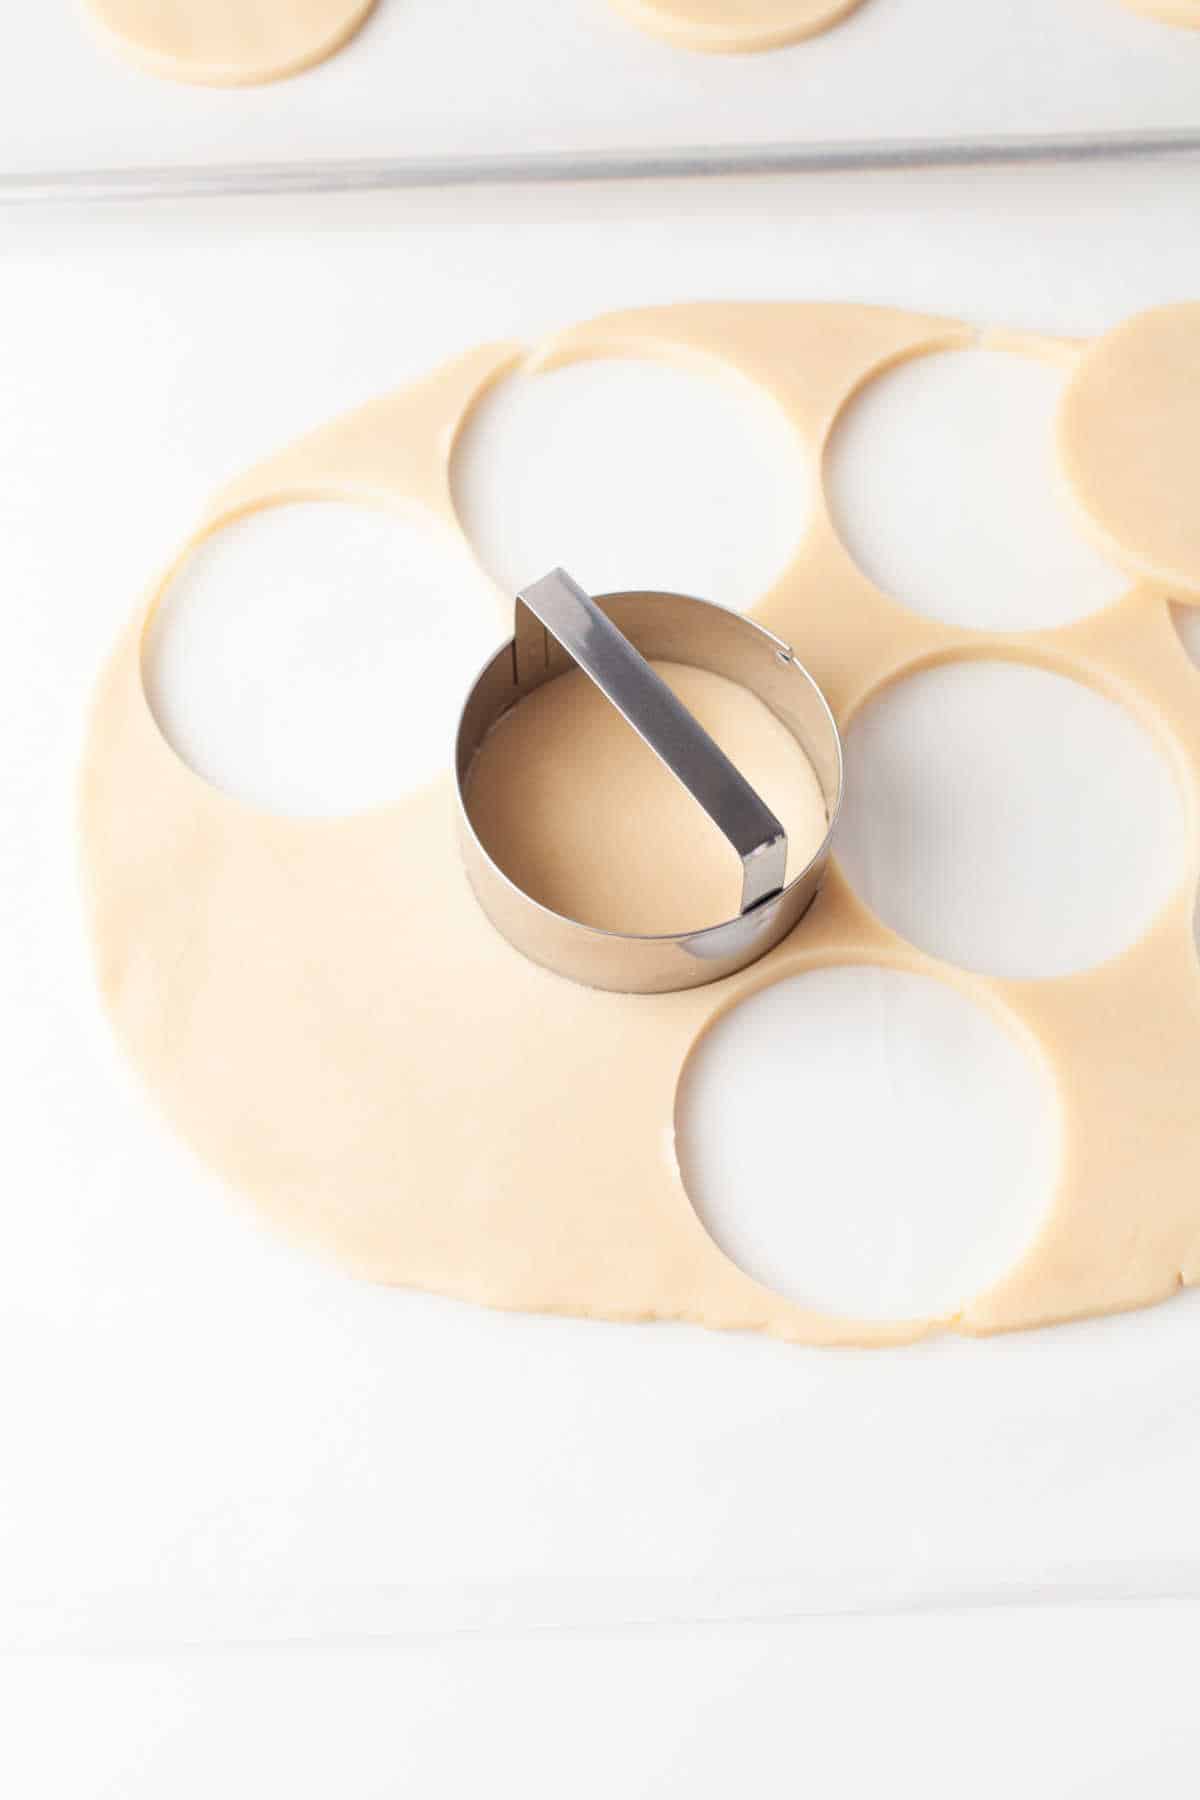 A round cookie cutter cutting circles of dough out. 